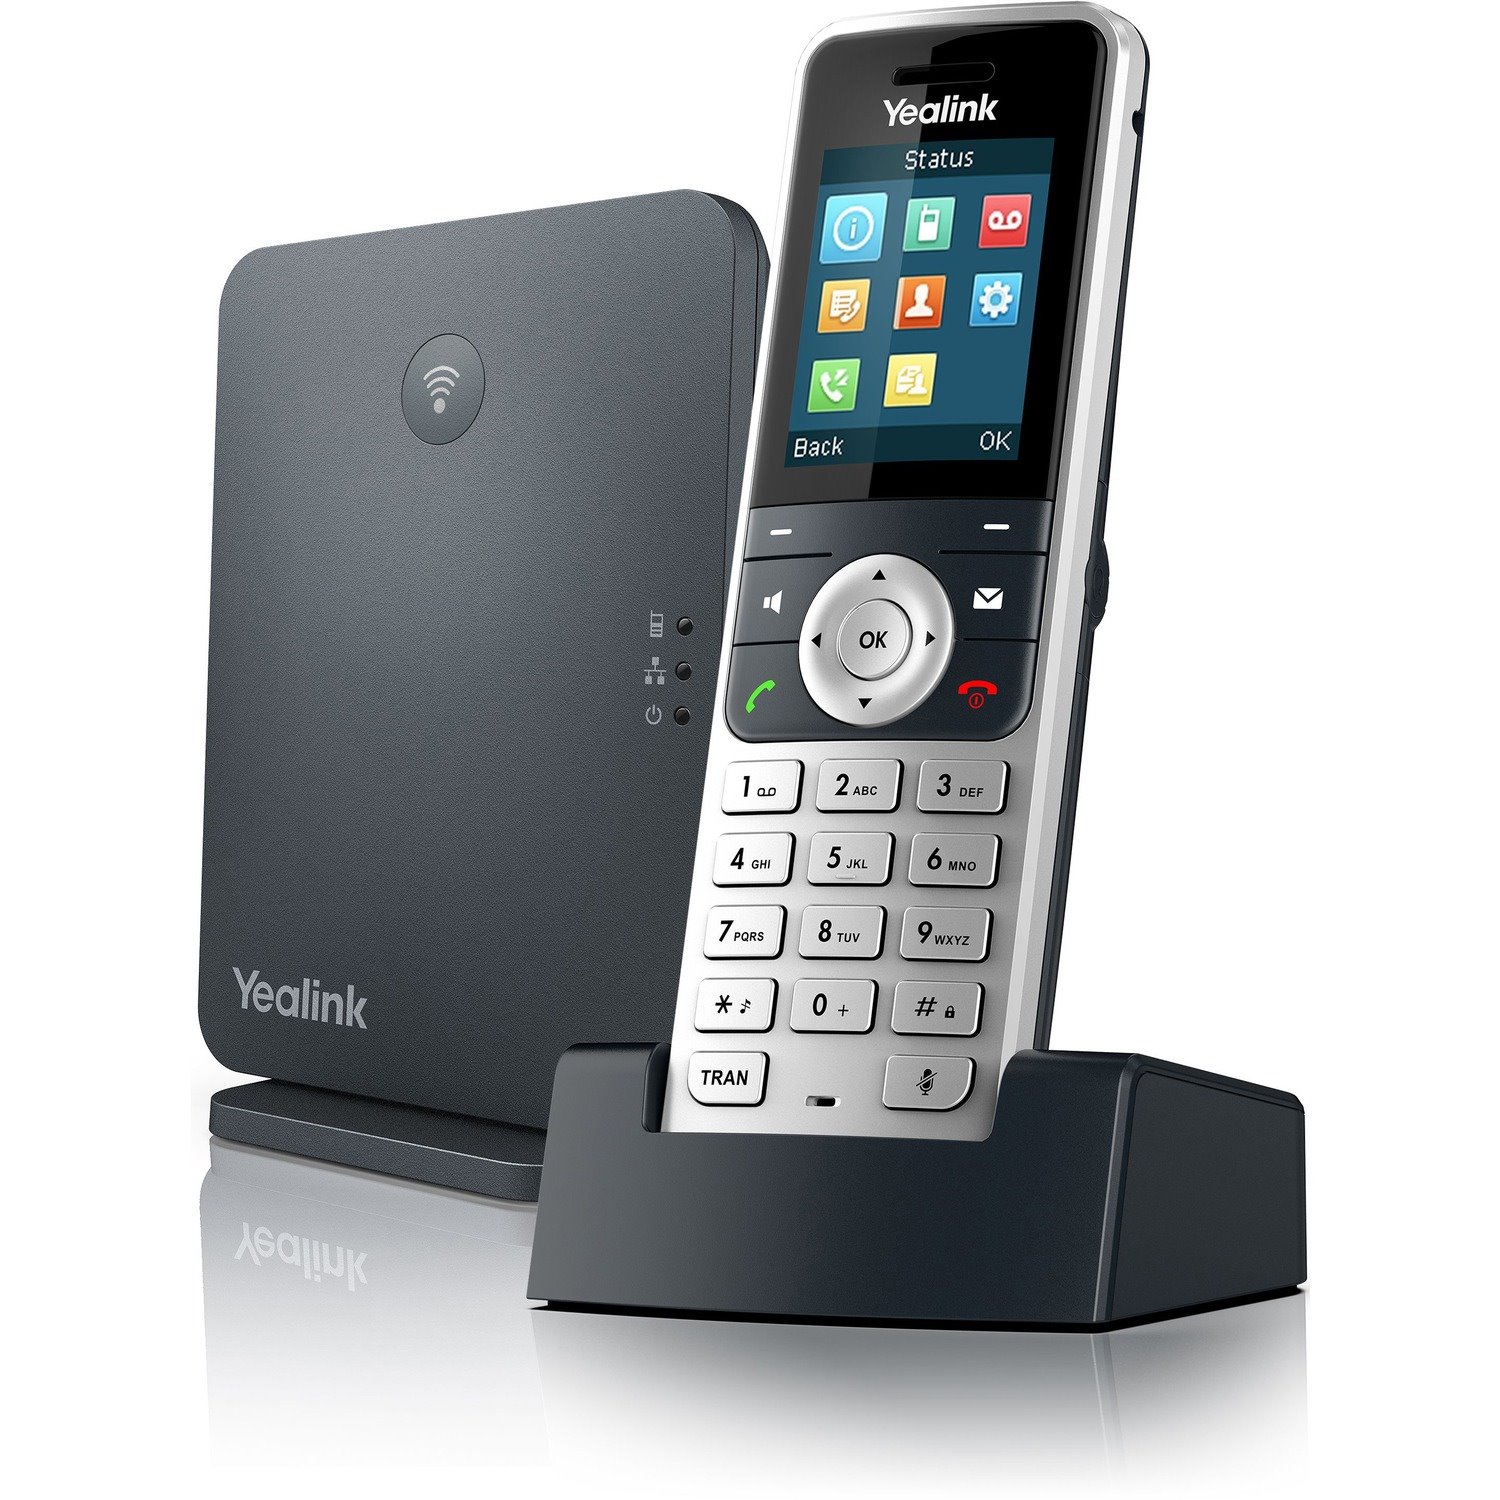 Yealink W53P IP Phone - Cordless - Corded - DECT - Wall Mountable, Desktop - Alabaster Silver, Classic Gray